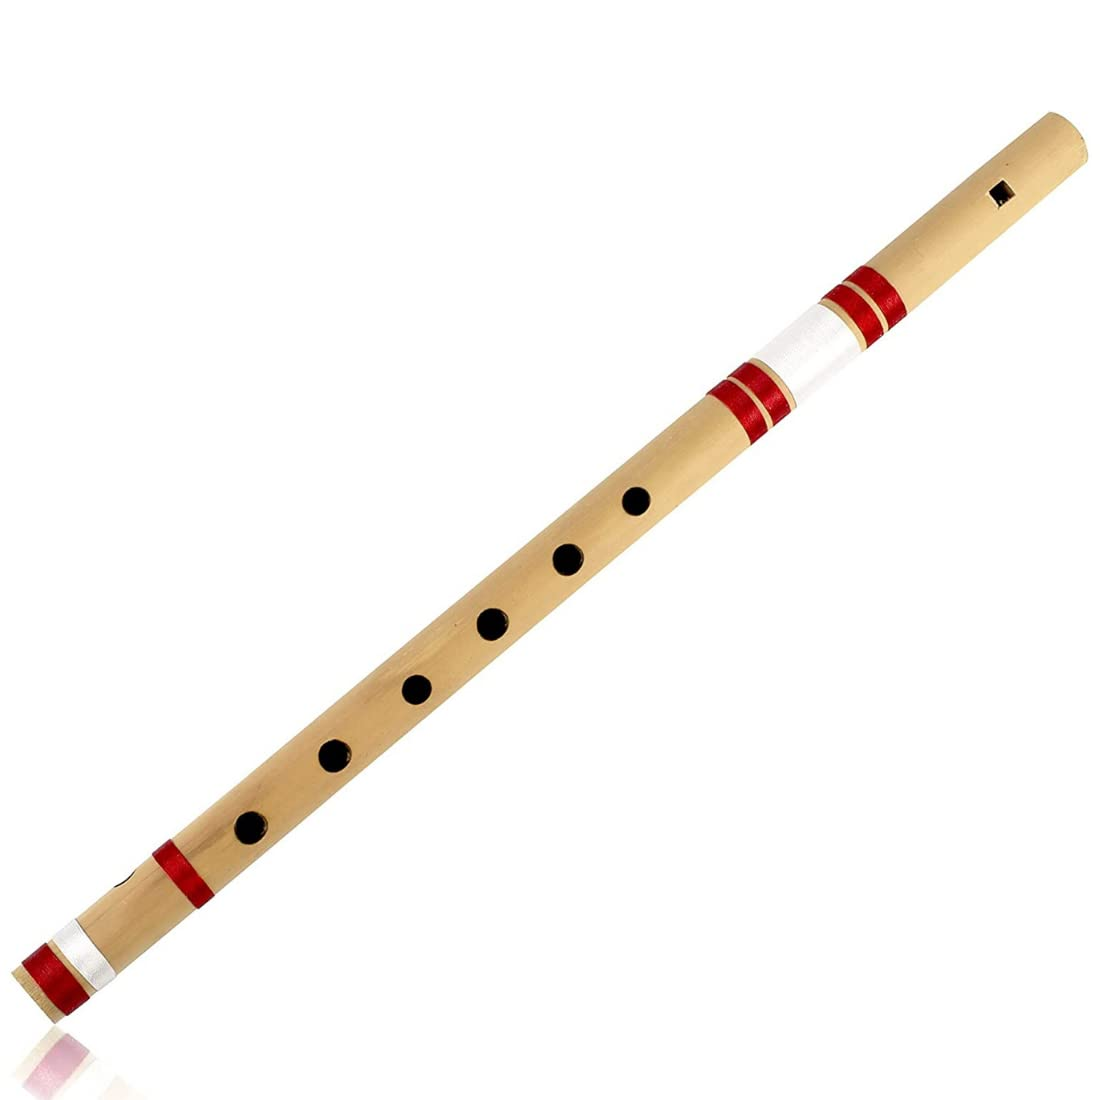 What is straight bamboo flute